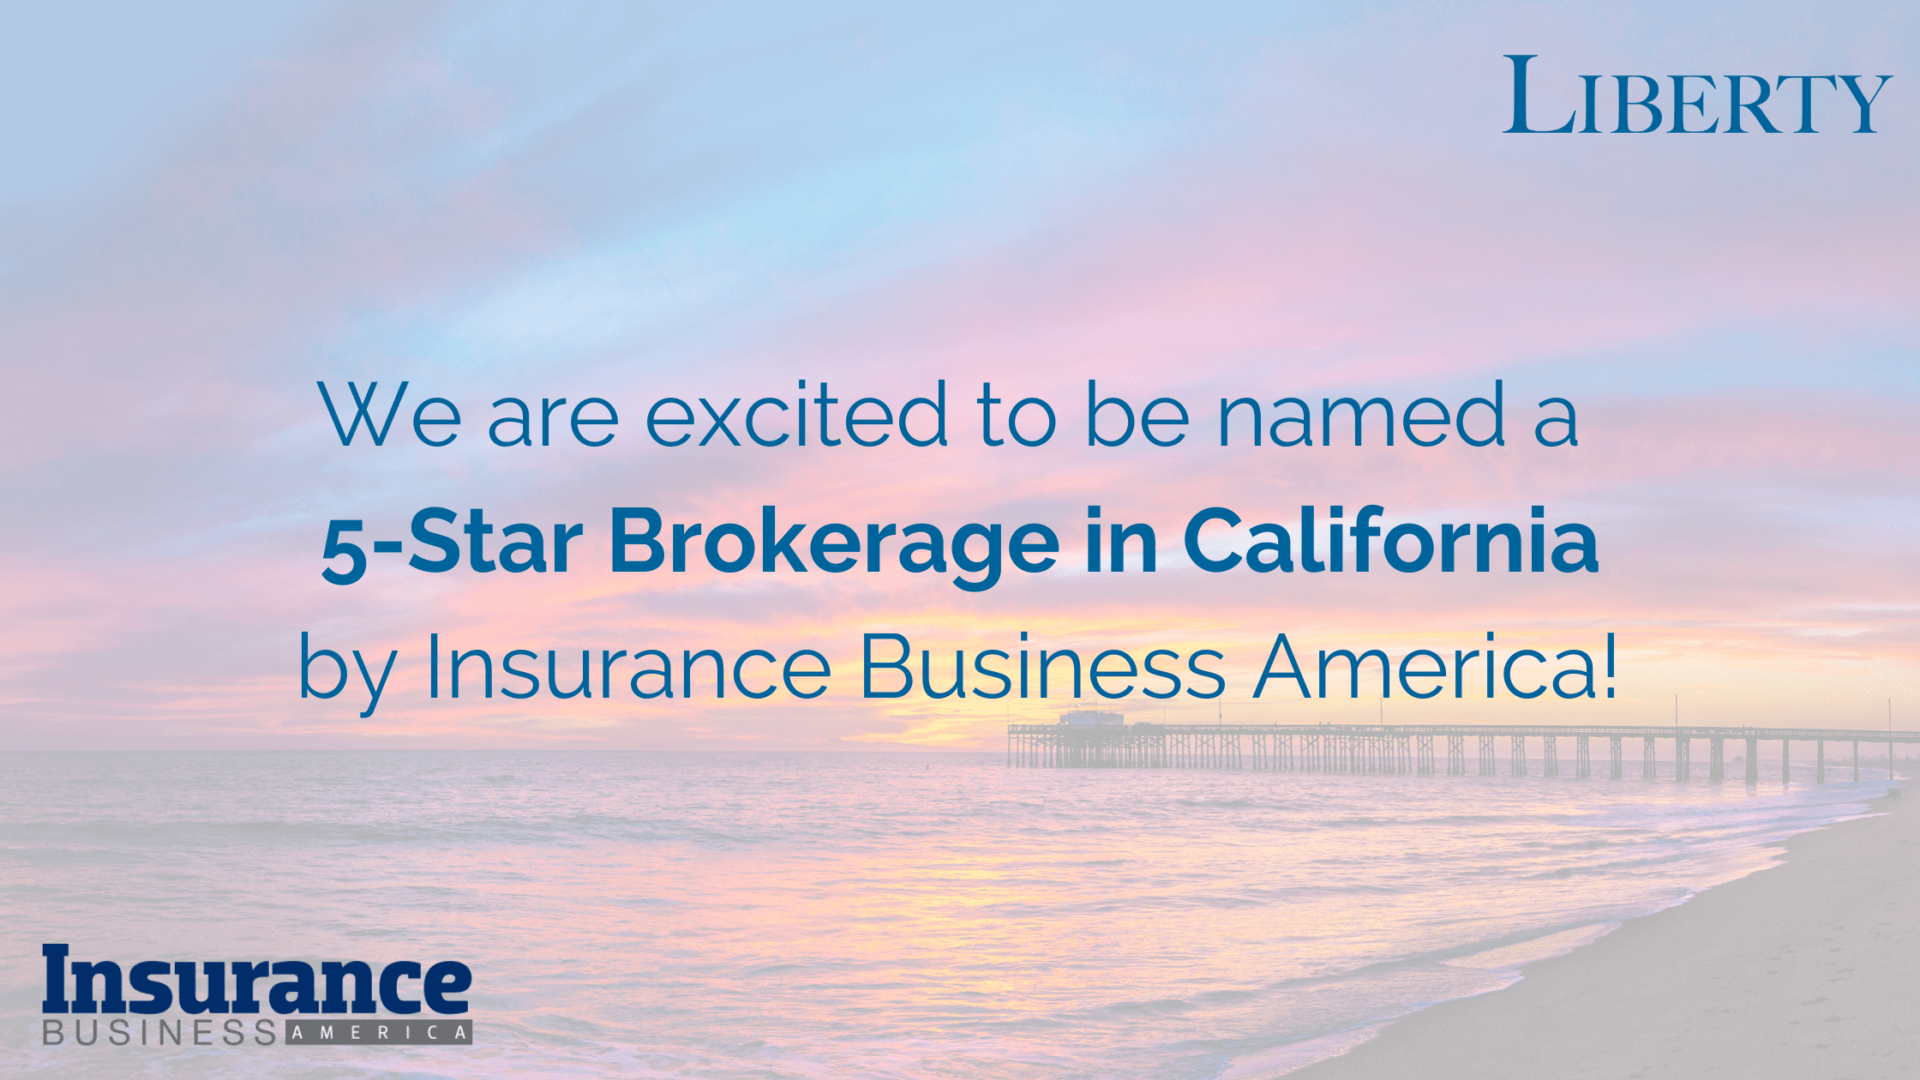 LIBERTY NAMED A 5-STAR BROKERAGES – CALIFORNIA 2022 BY INSURANCE BUSINESS AMERICA